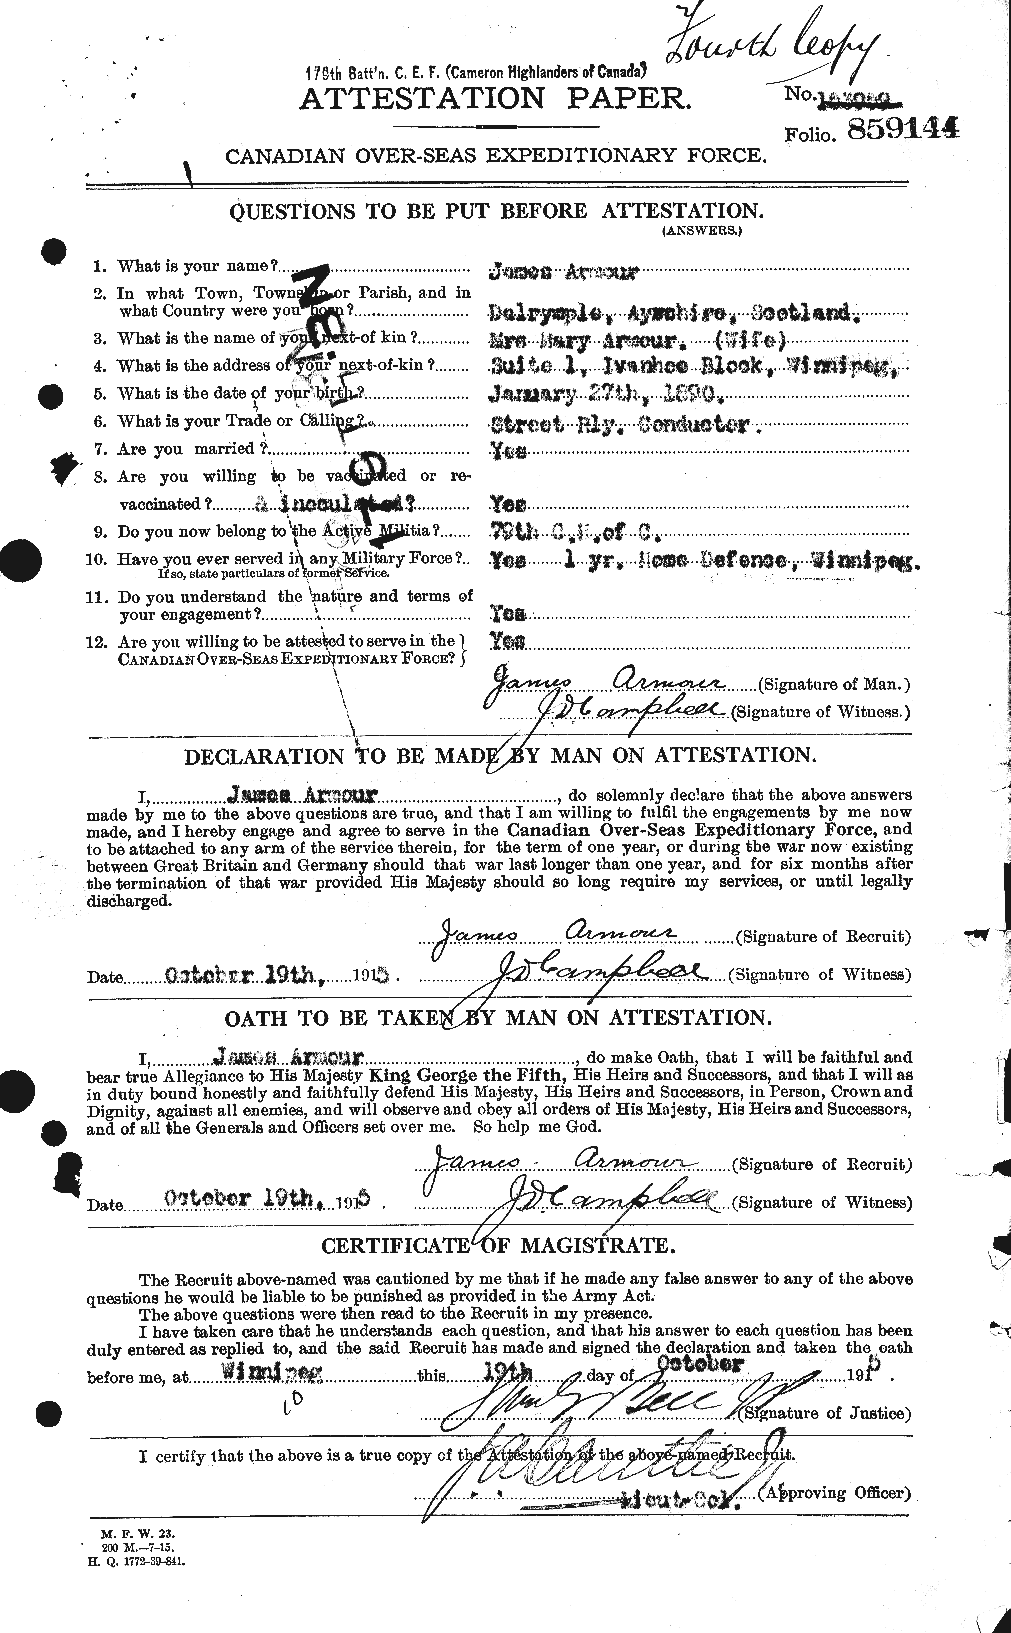 Personnel Records of the First World War - CEF 213314a